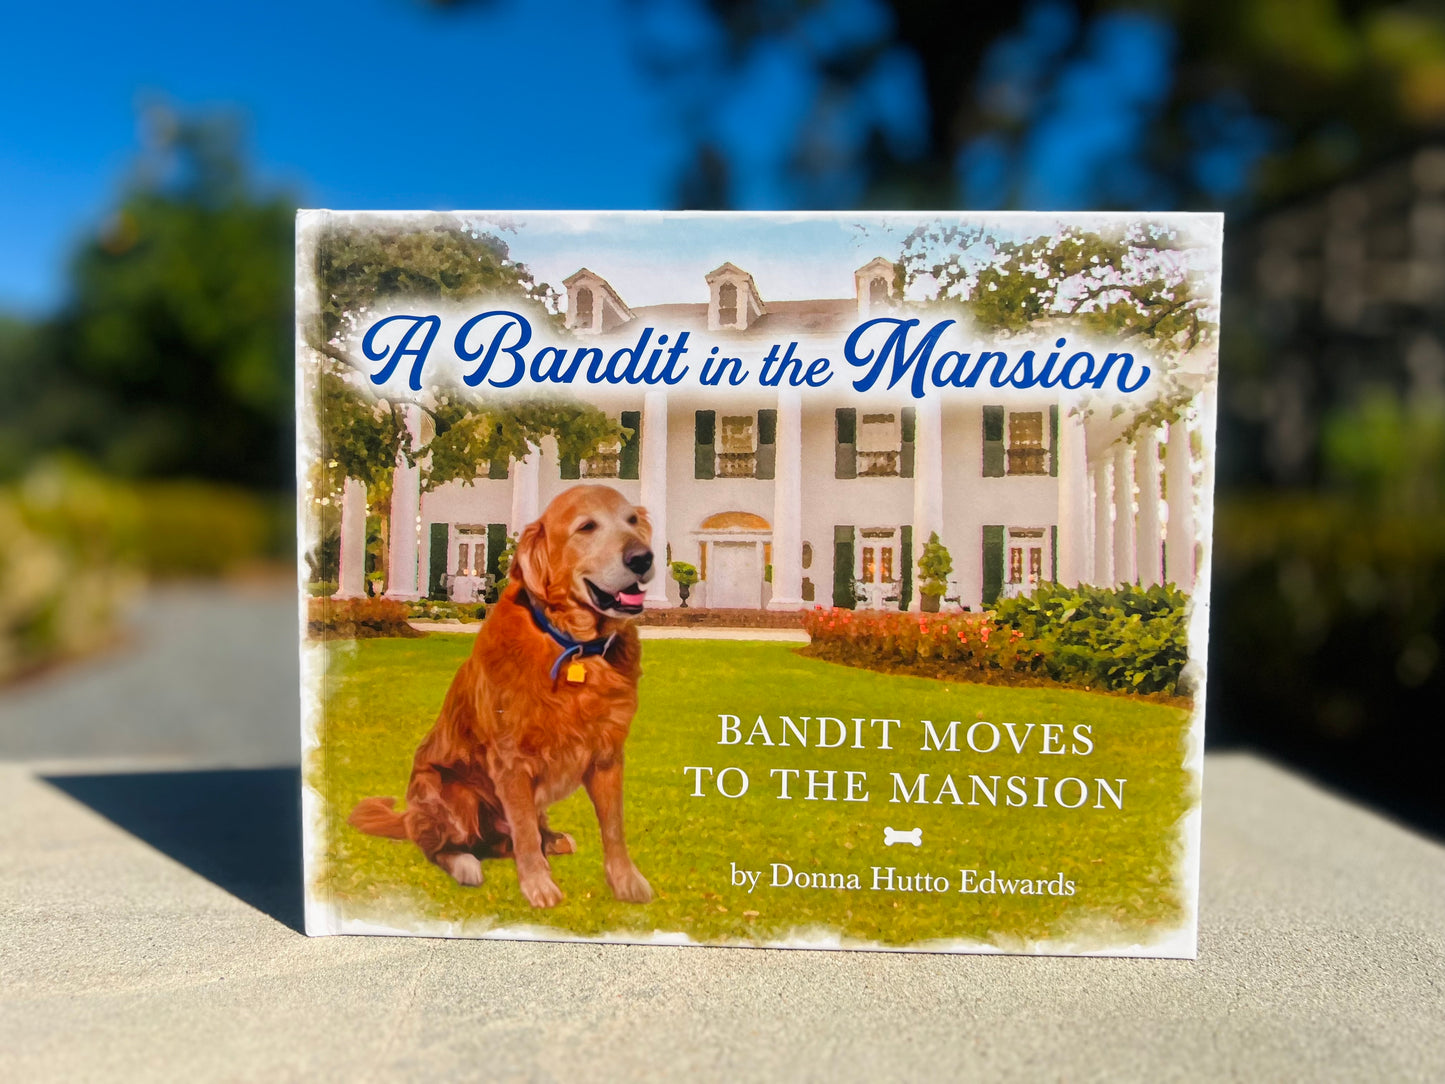 A Bandit in the Mansion